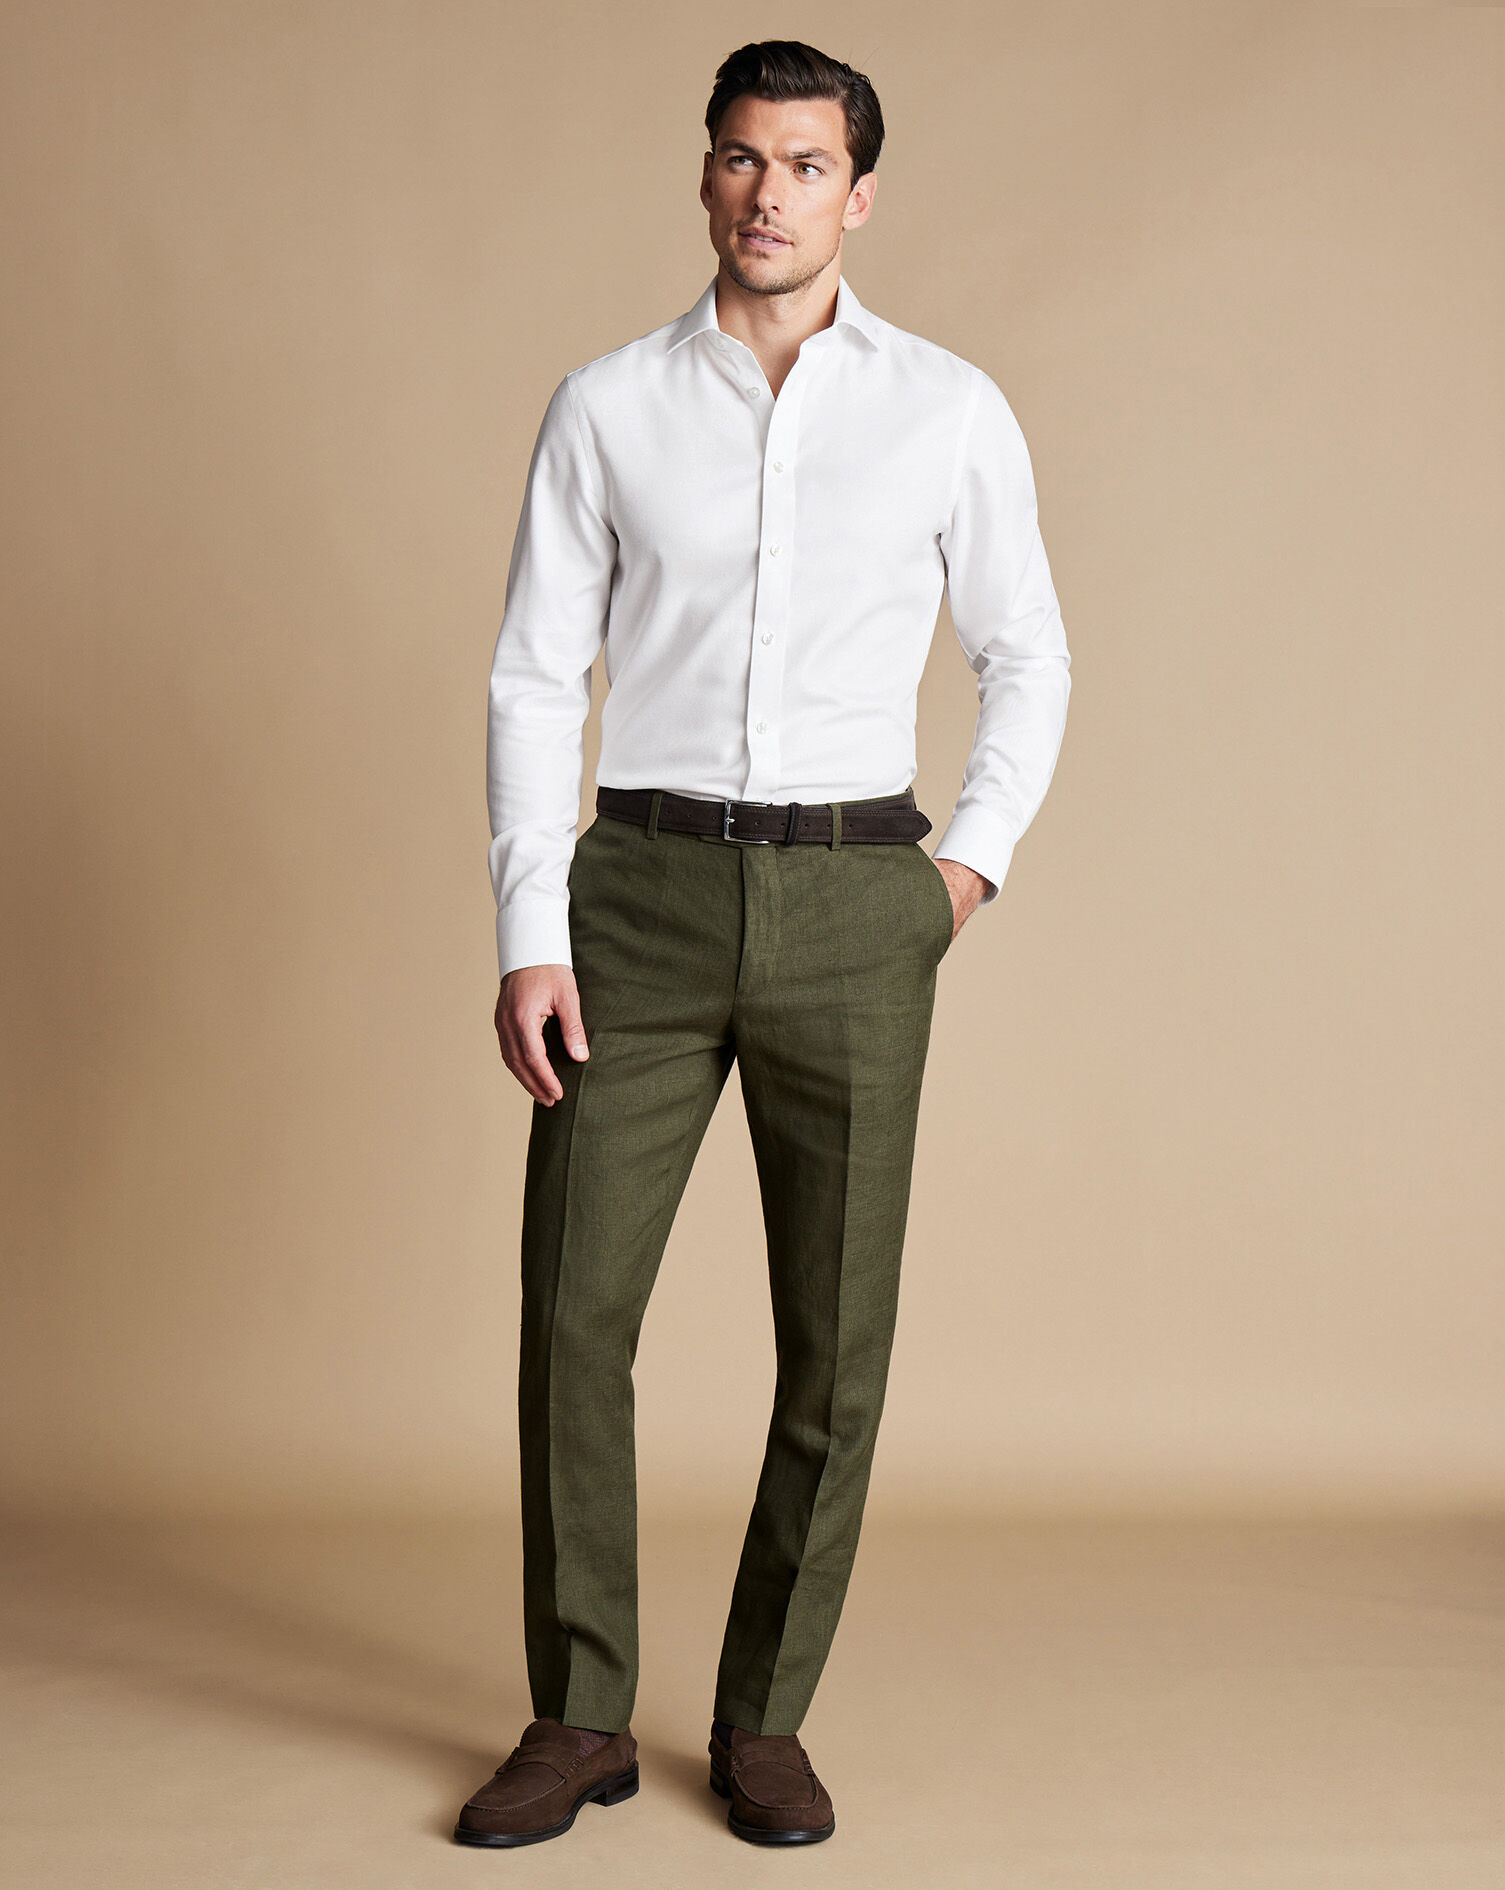 Mens Smart Casual Summer Trousers Fully Elasticated Pull On Trousers with  Drawcord Outdoor Walking Pants Perfect for Sports Work or Travel 32W / 27L  Khaki : Amazon.co.uk: Fashion